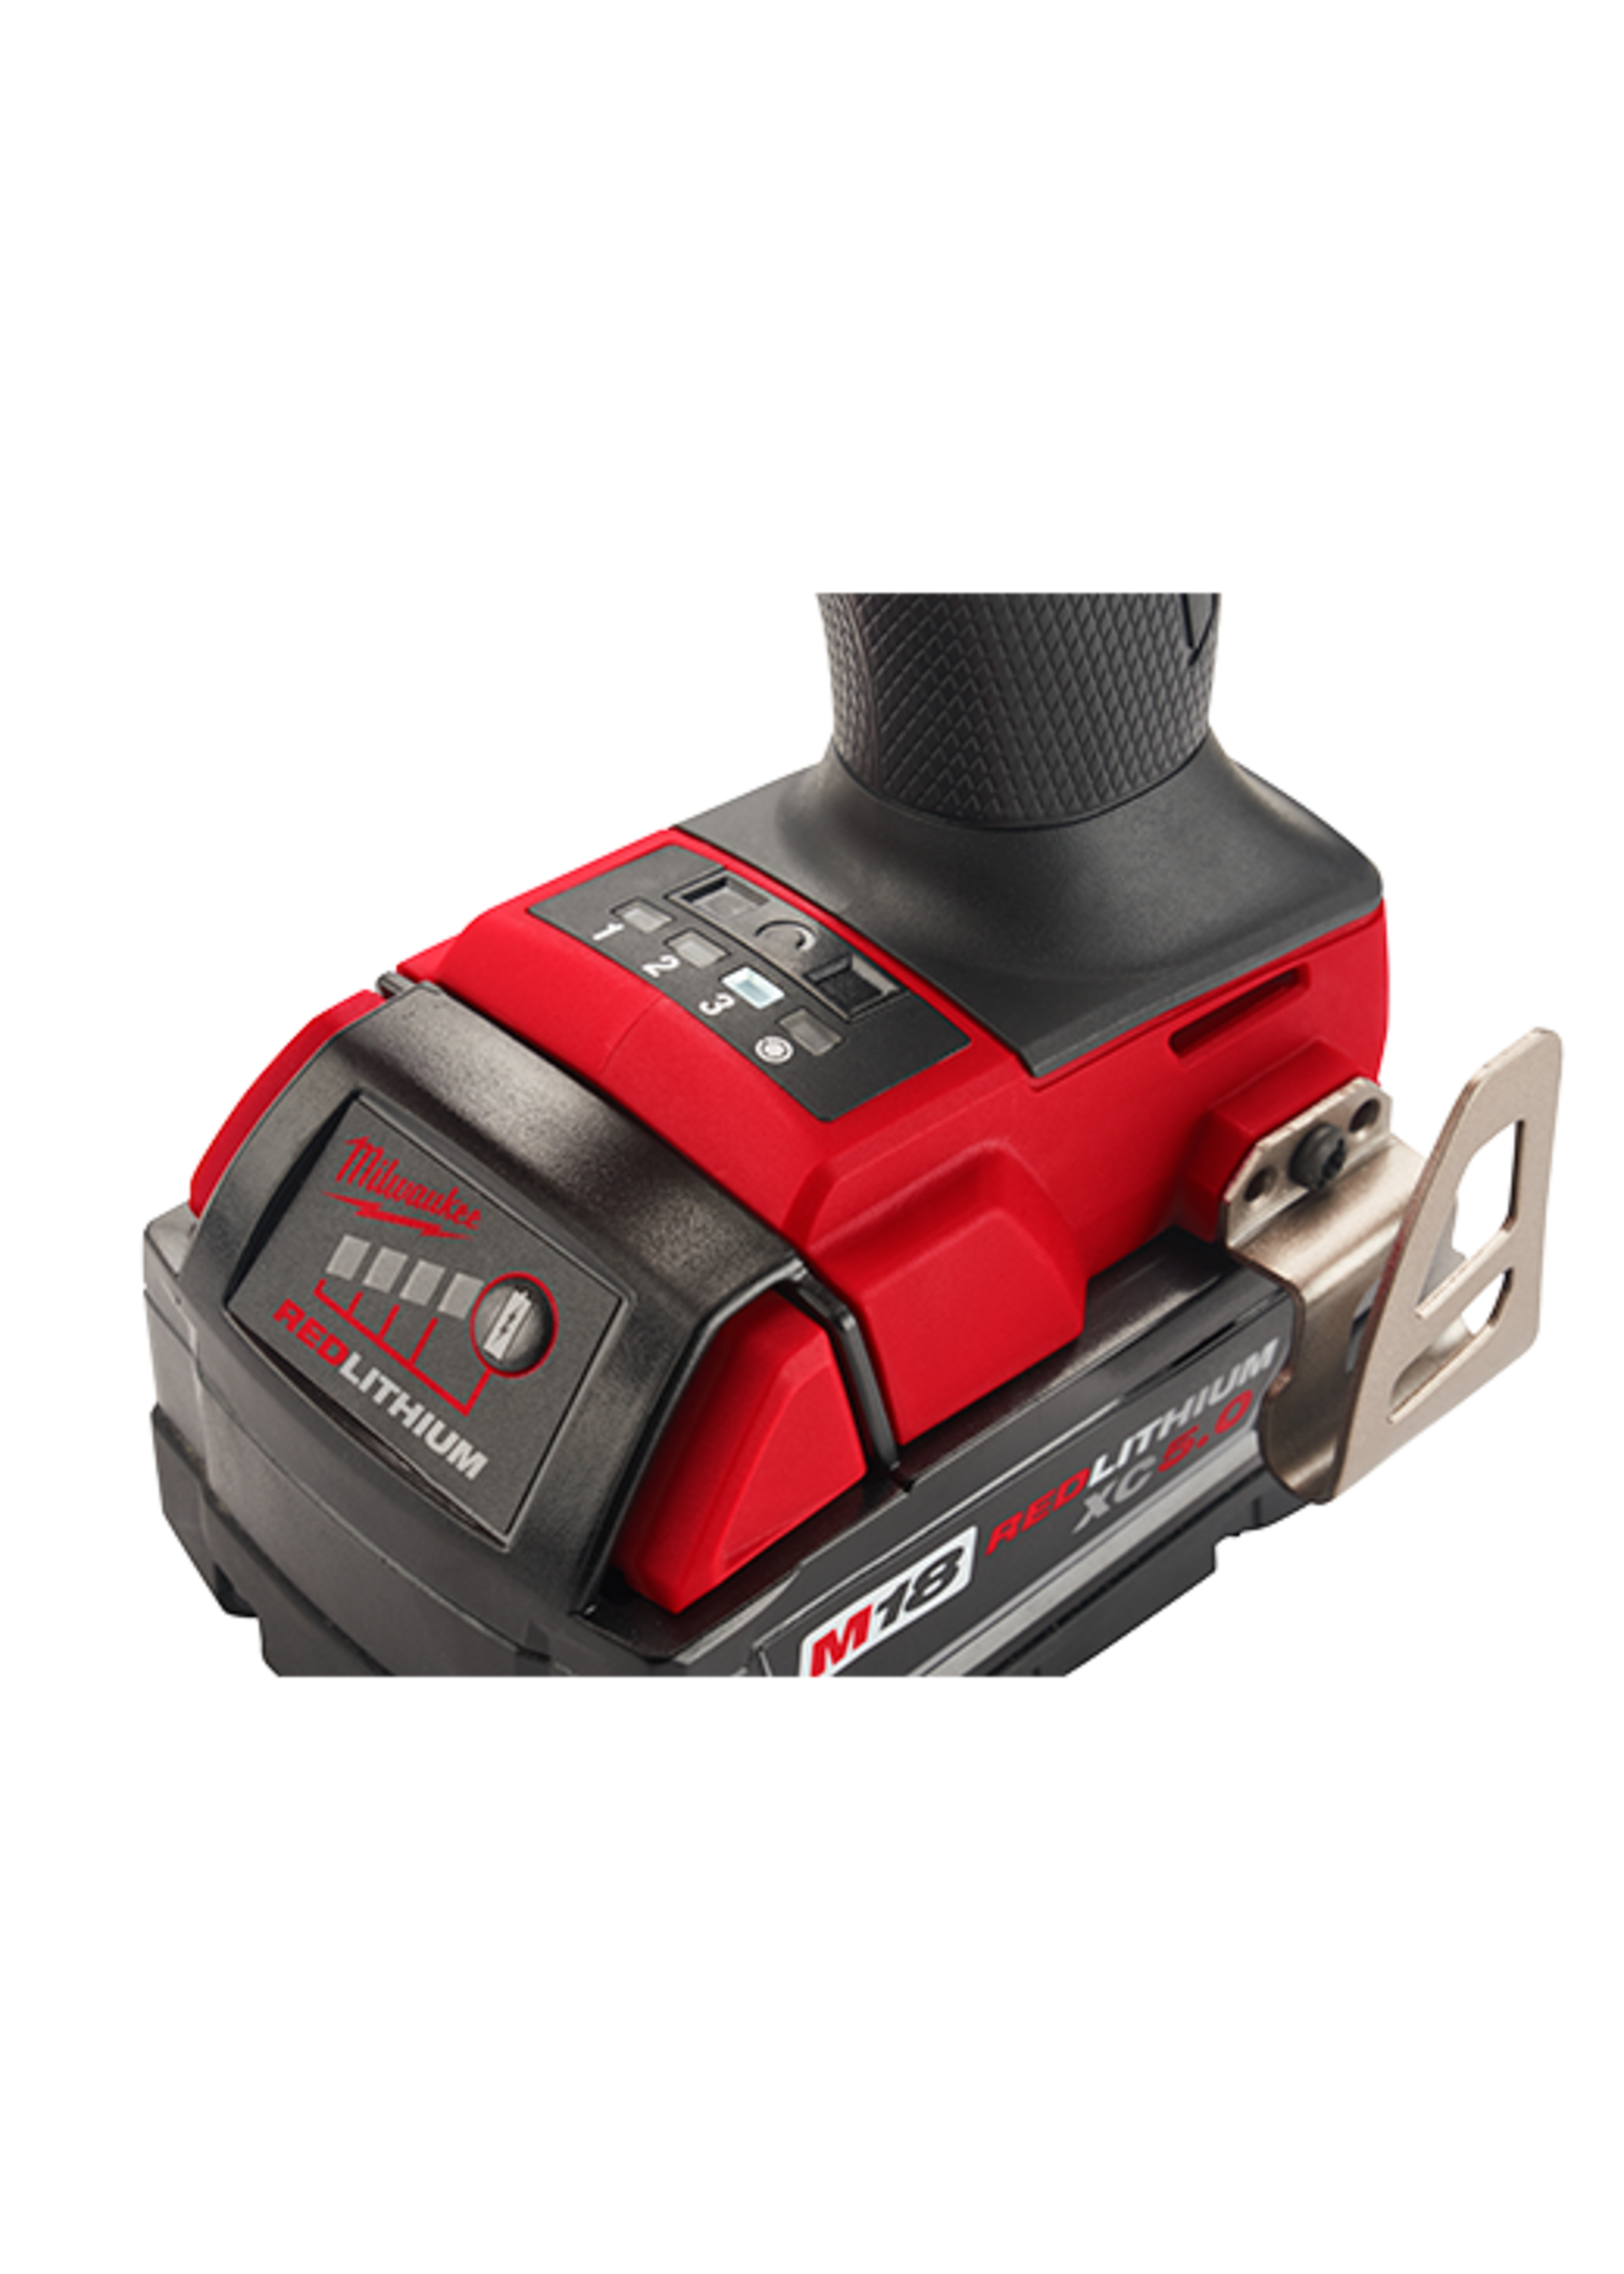 MILWAUKEE MILWAUKEE 2854-20 M18 FUEL™ 3/8"" Compact ImpactWrench w/ Friction Ring Bare Tool